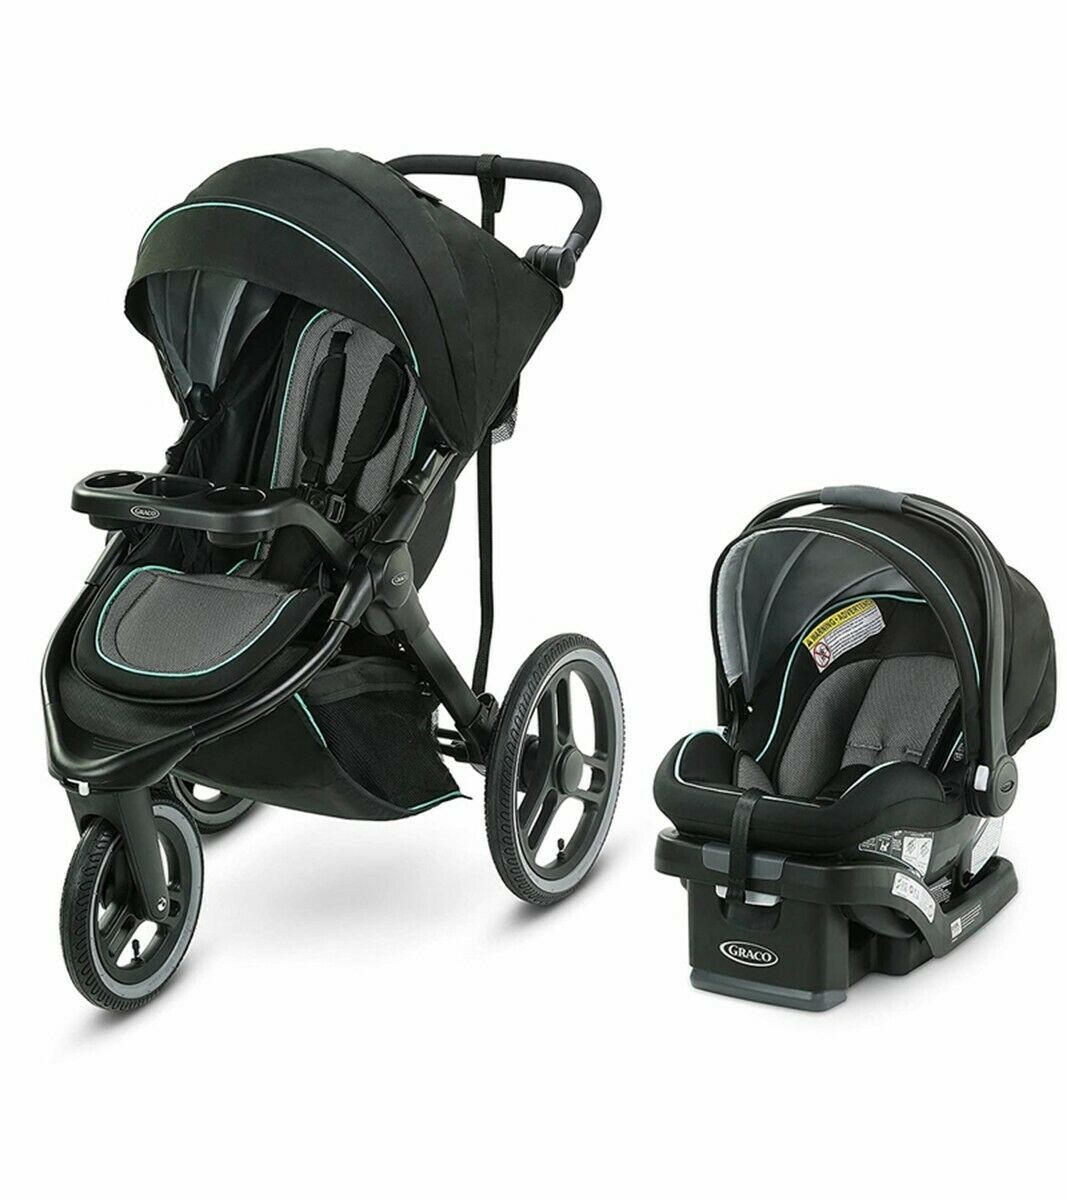 Graco FitFold Baby Jogger Stroller with Car Seat foldable Compact Travel System